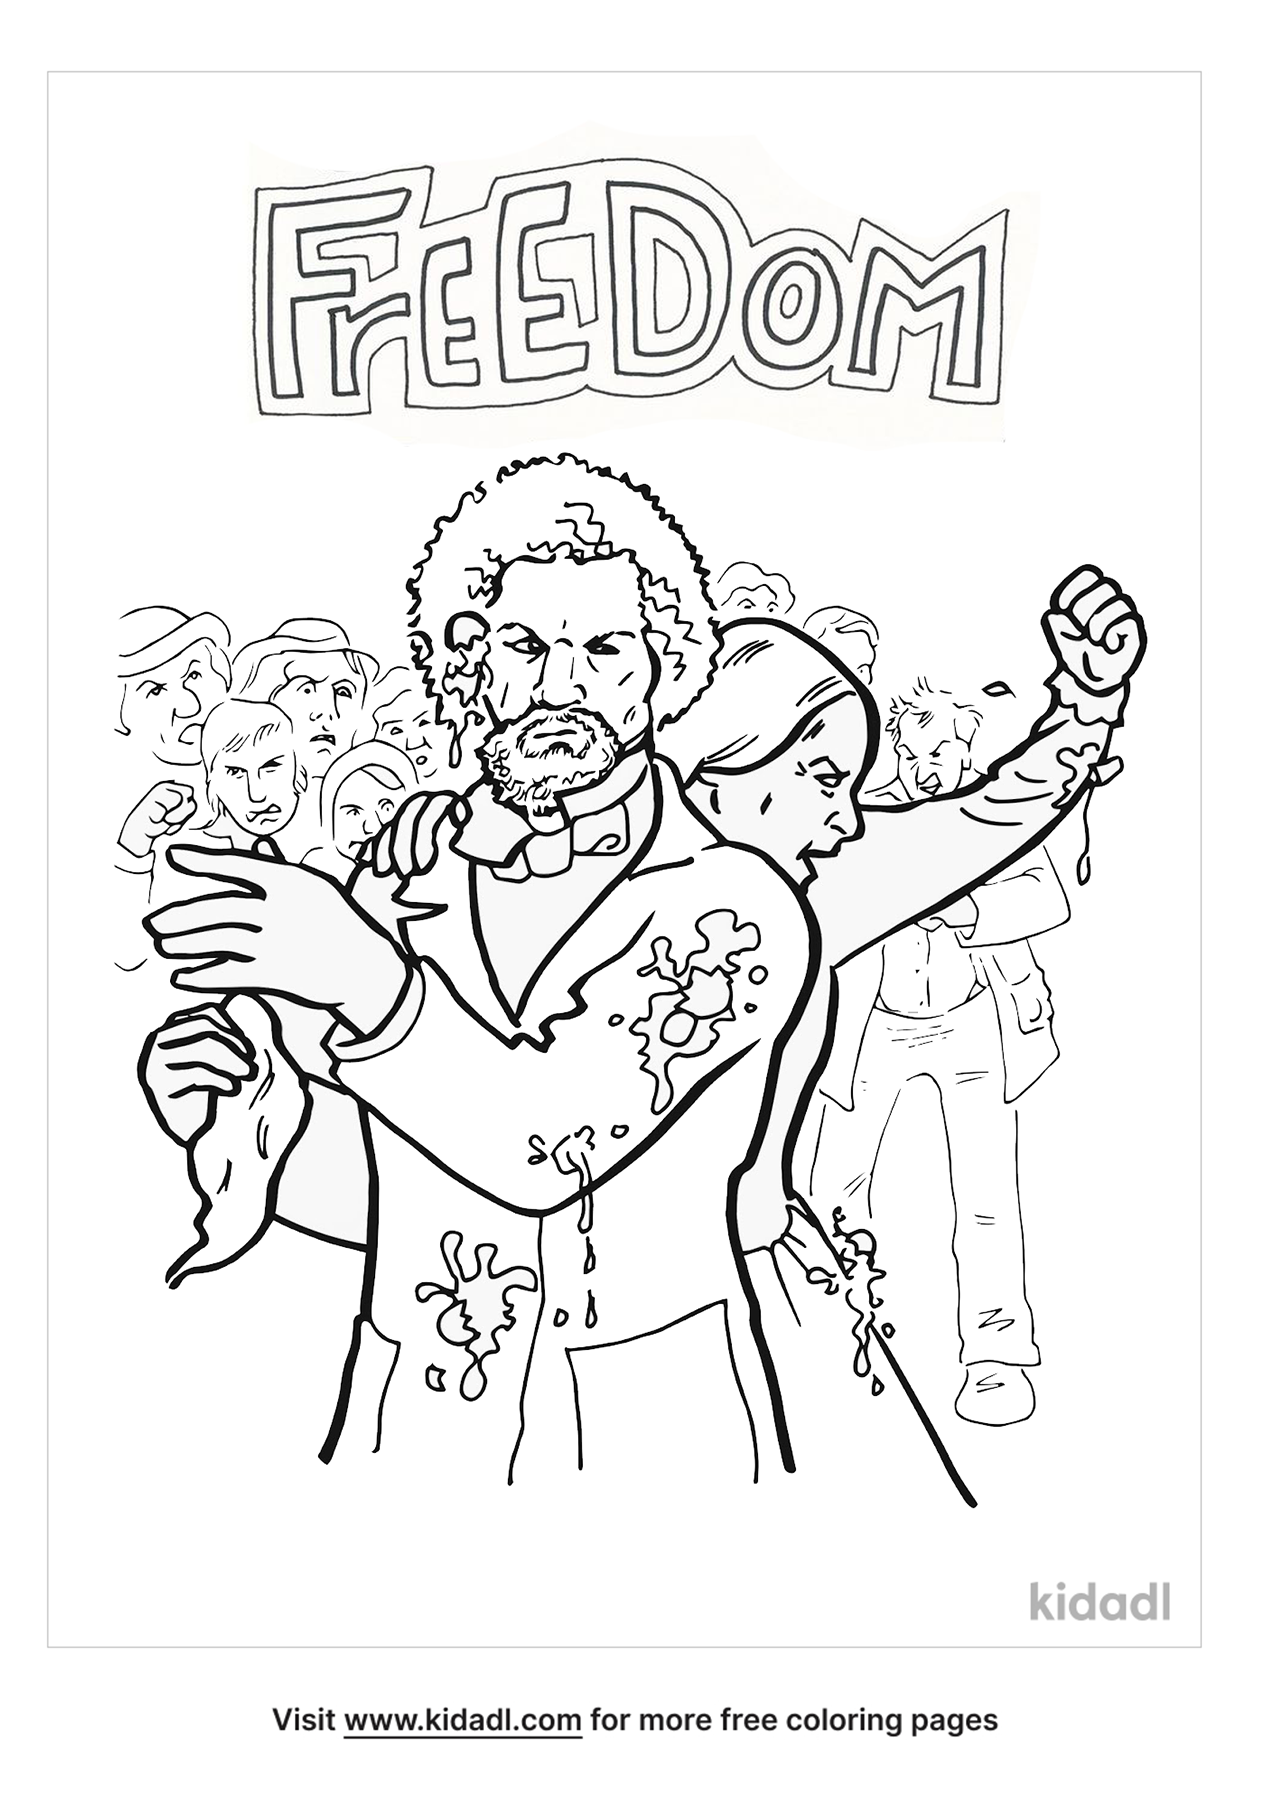 People Who Got Freedom Coloring Pages | Free History Coloring Pages | Kidadl